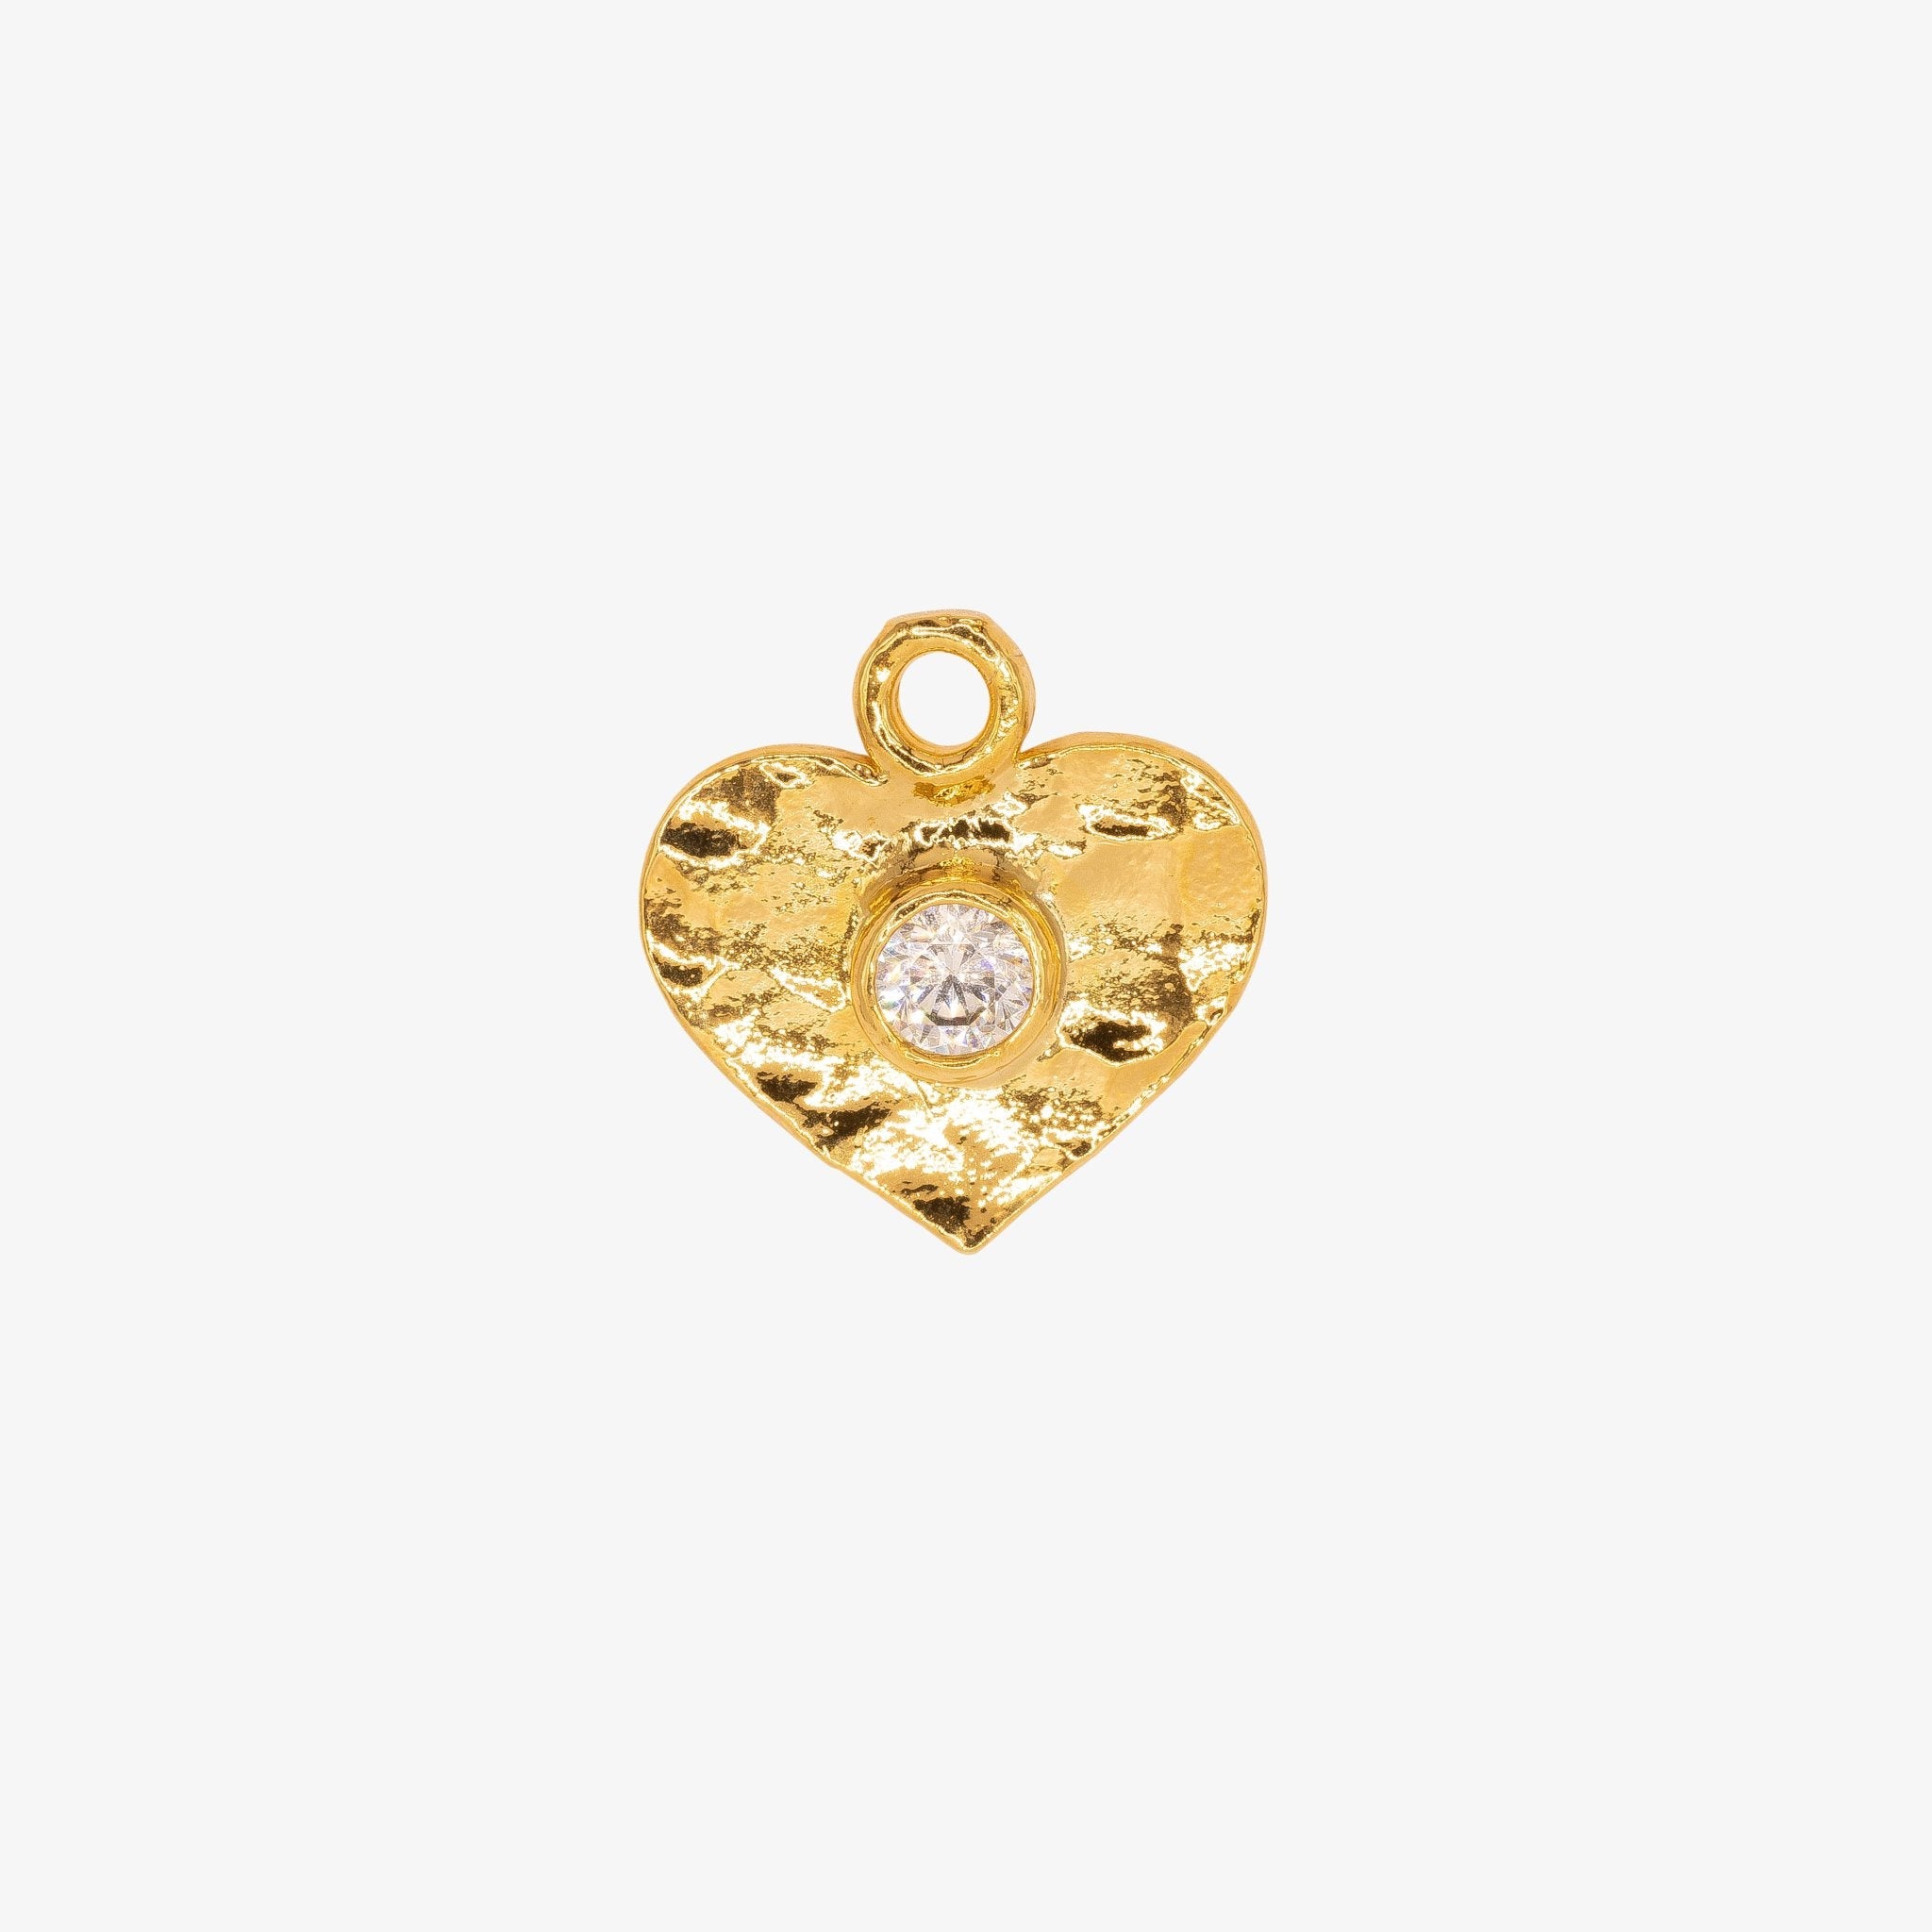 Hammered Heart Charm with CZ Charm 14K Gold - GoldandWillow